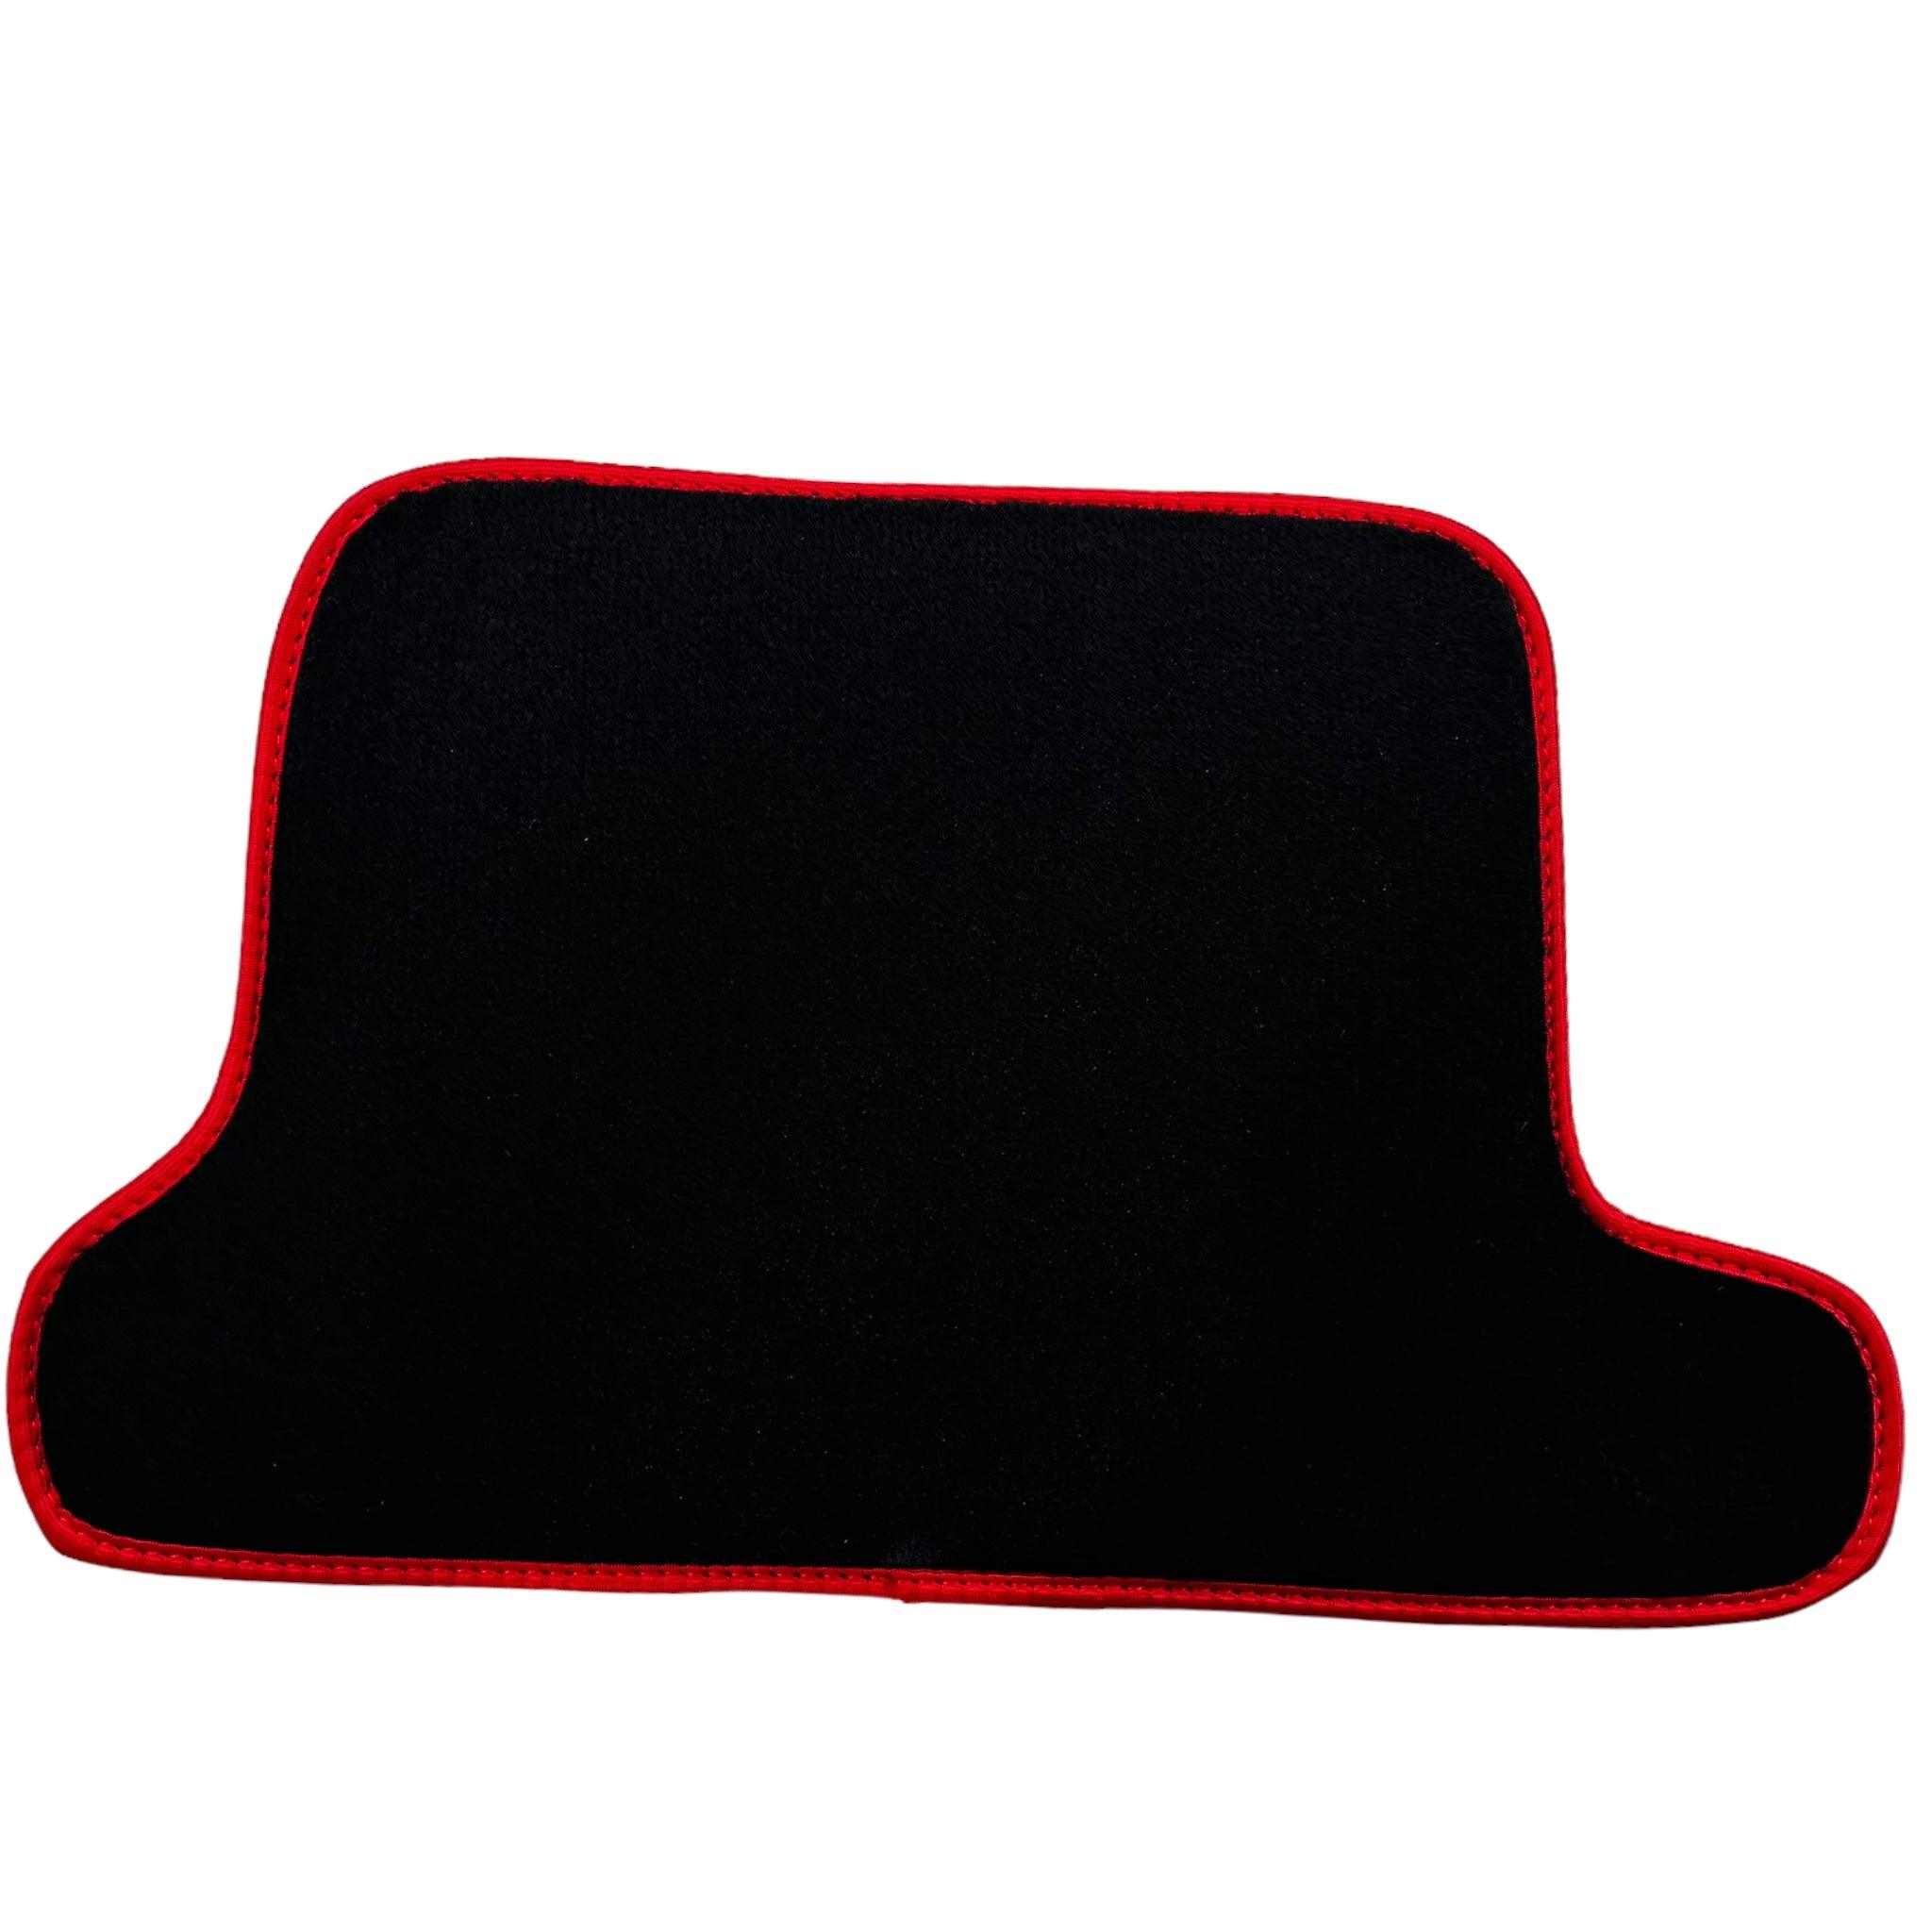 Black Floor Mats For BMW 8 Series E31 2-door Coupe (1989-1999) ER56 Design with Red Trim